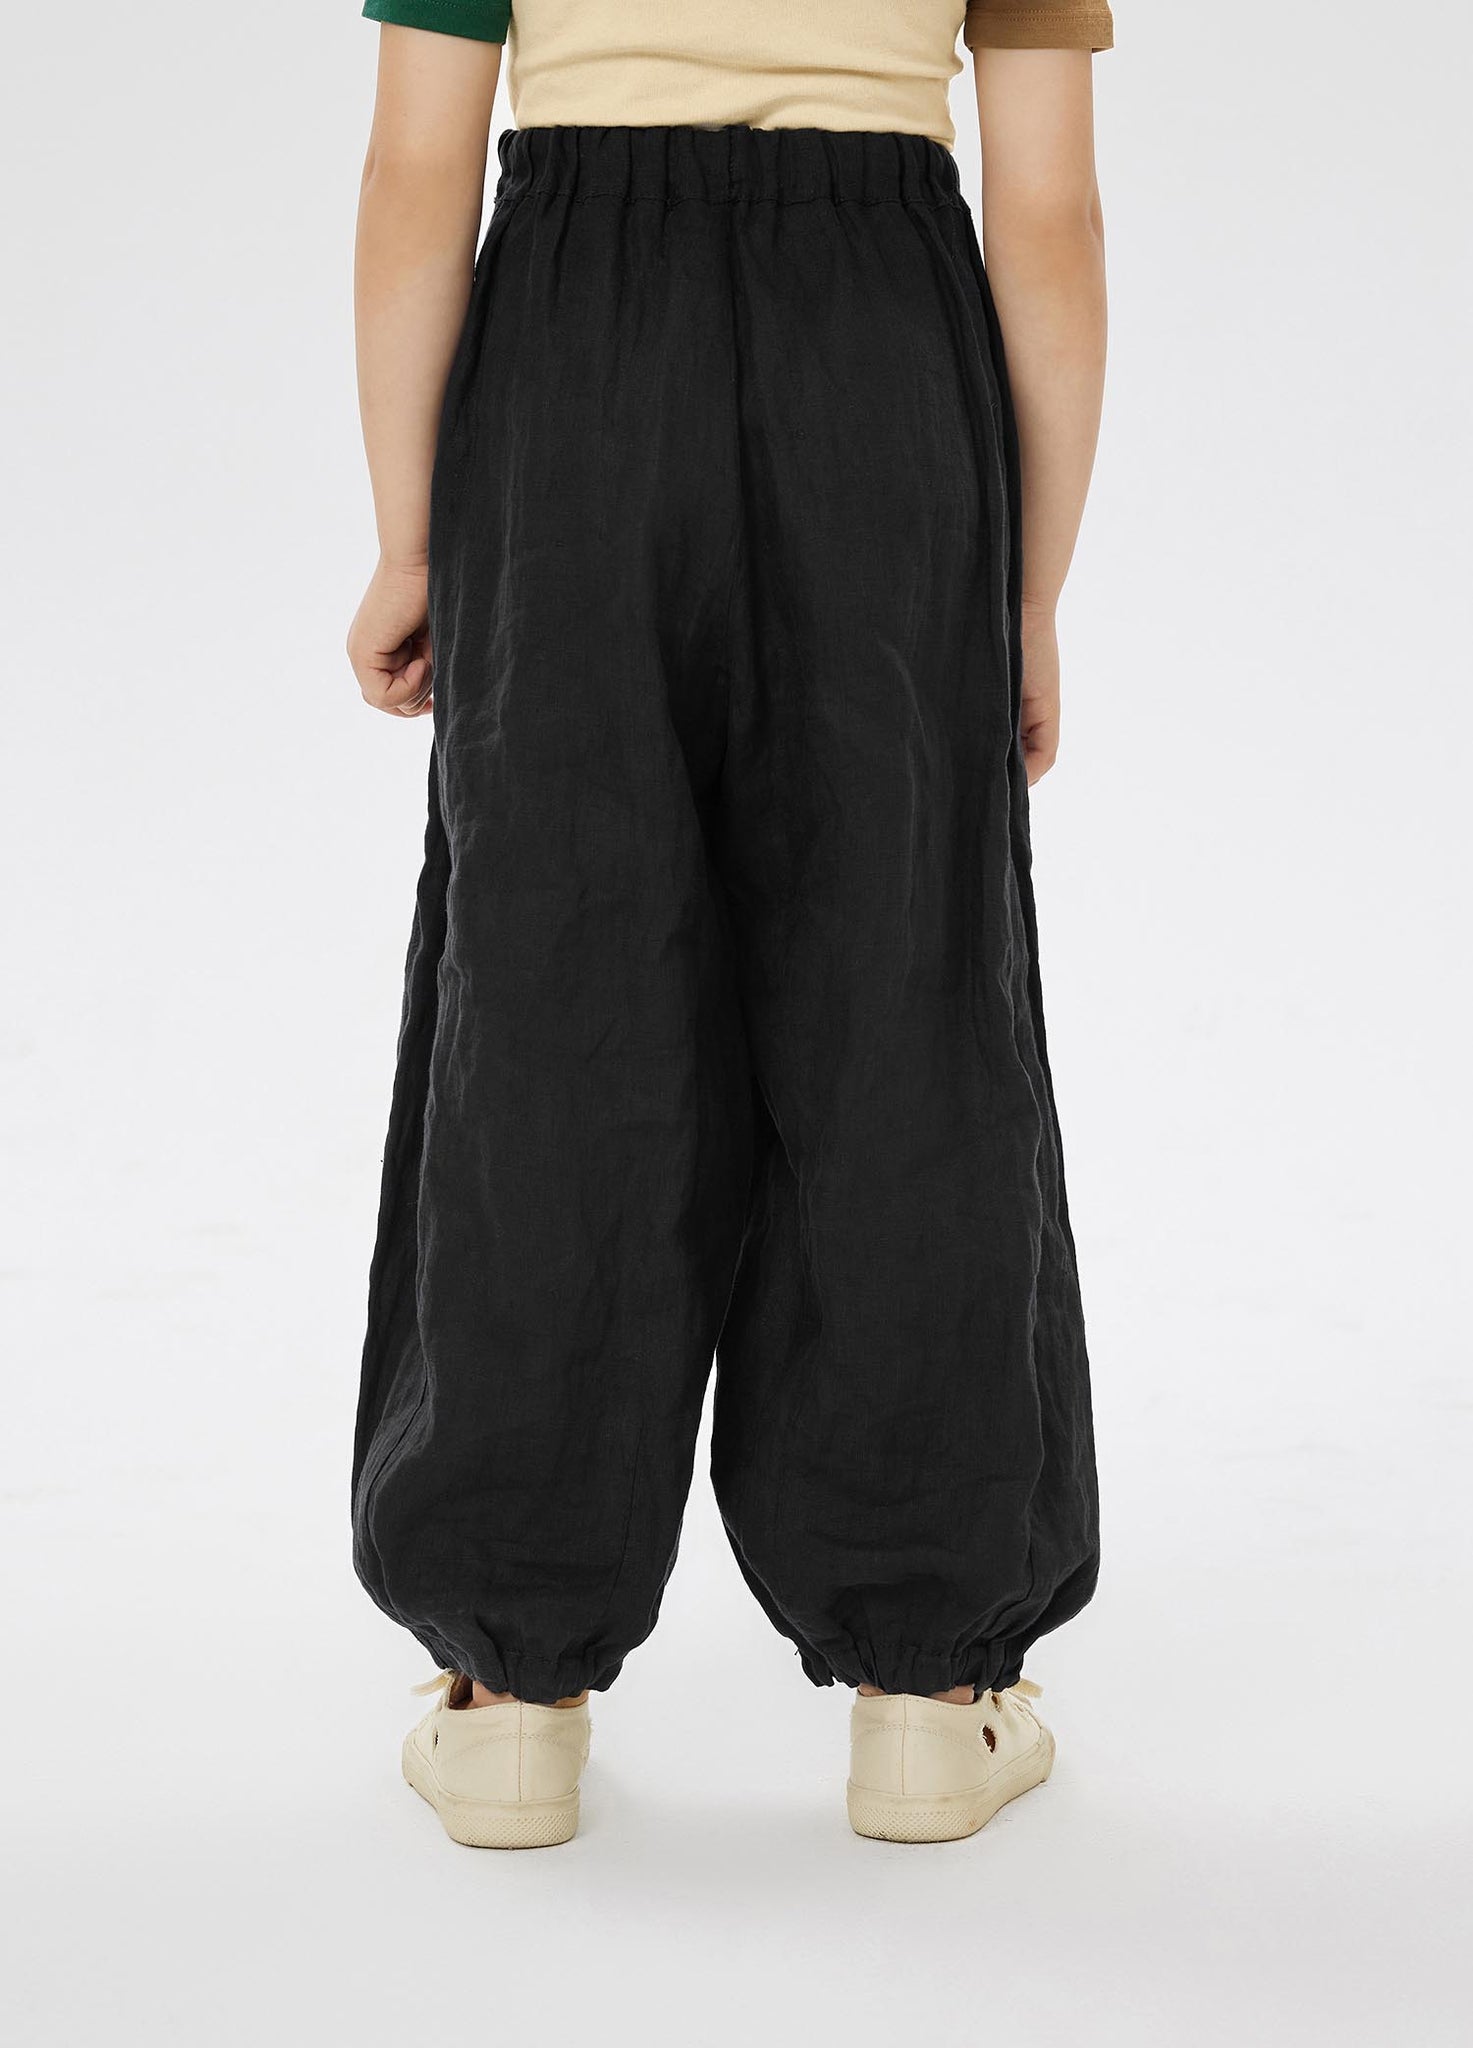 Pants / jnby by JNBY Solid Loose Fit Line Pants